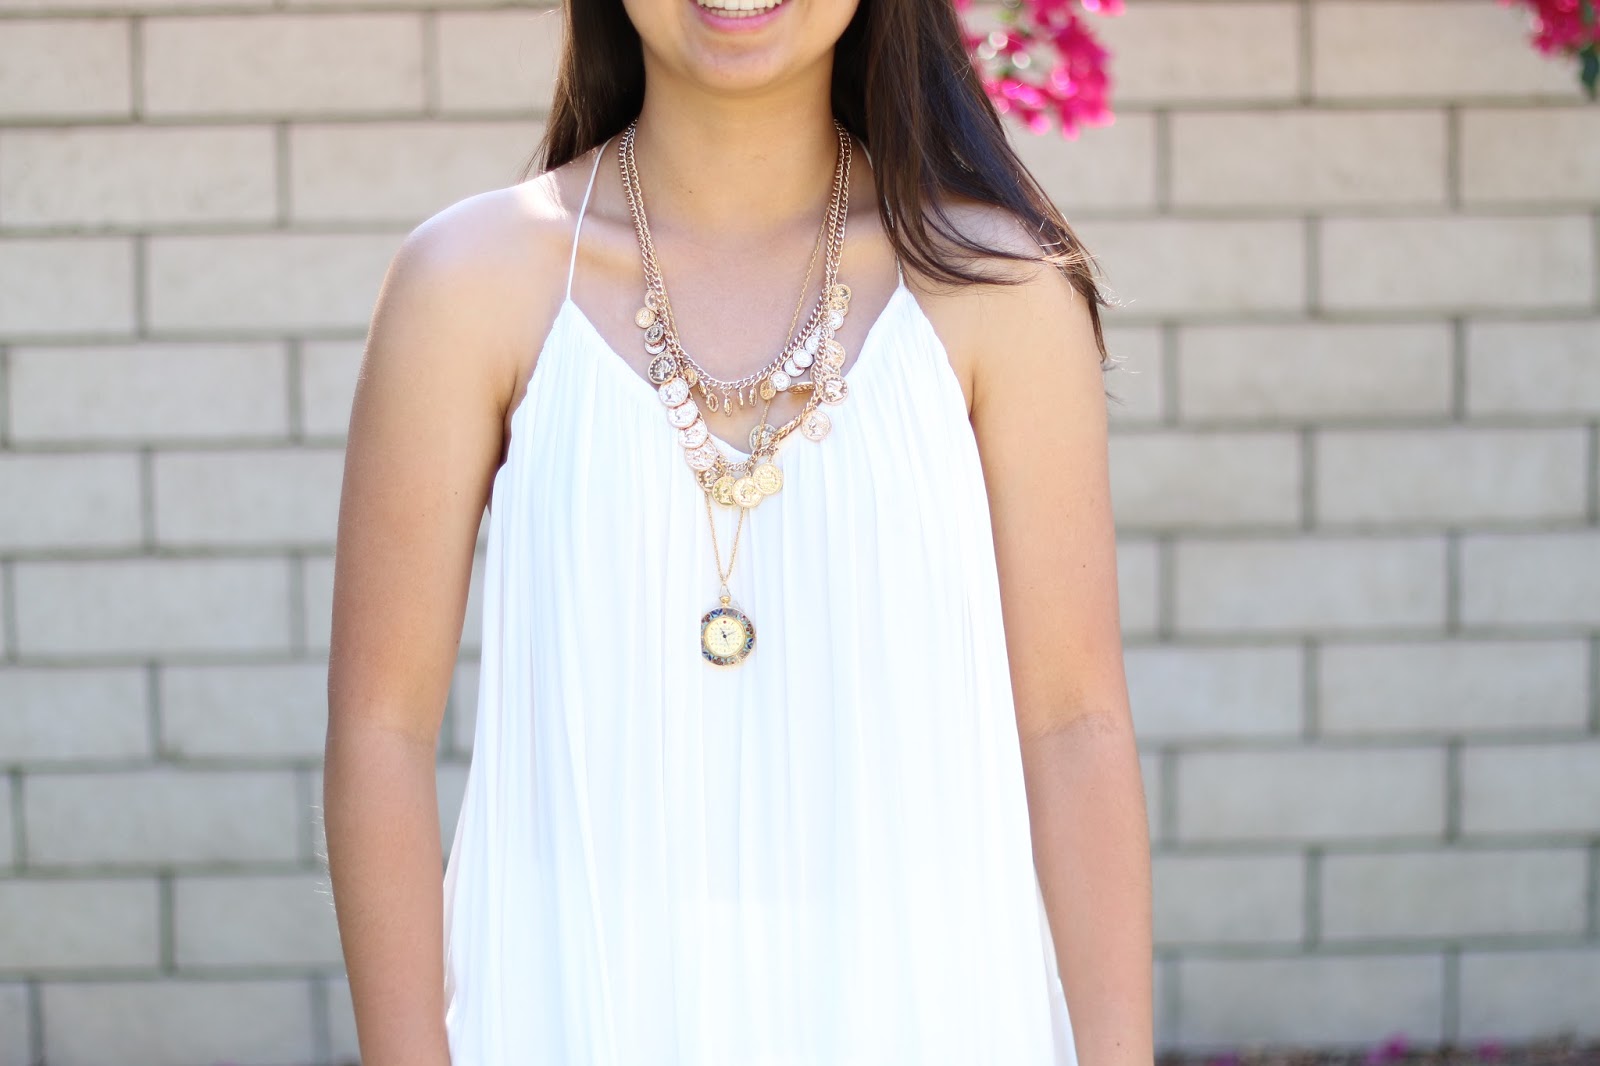 outfit of the day, style, dress, forever 21, tumblr, fashion blogger, layered necklaces